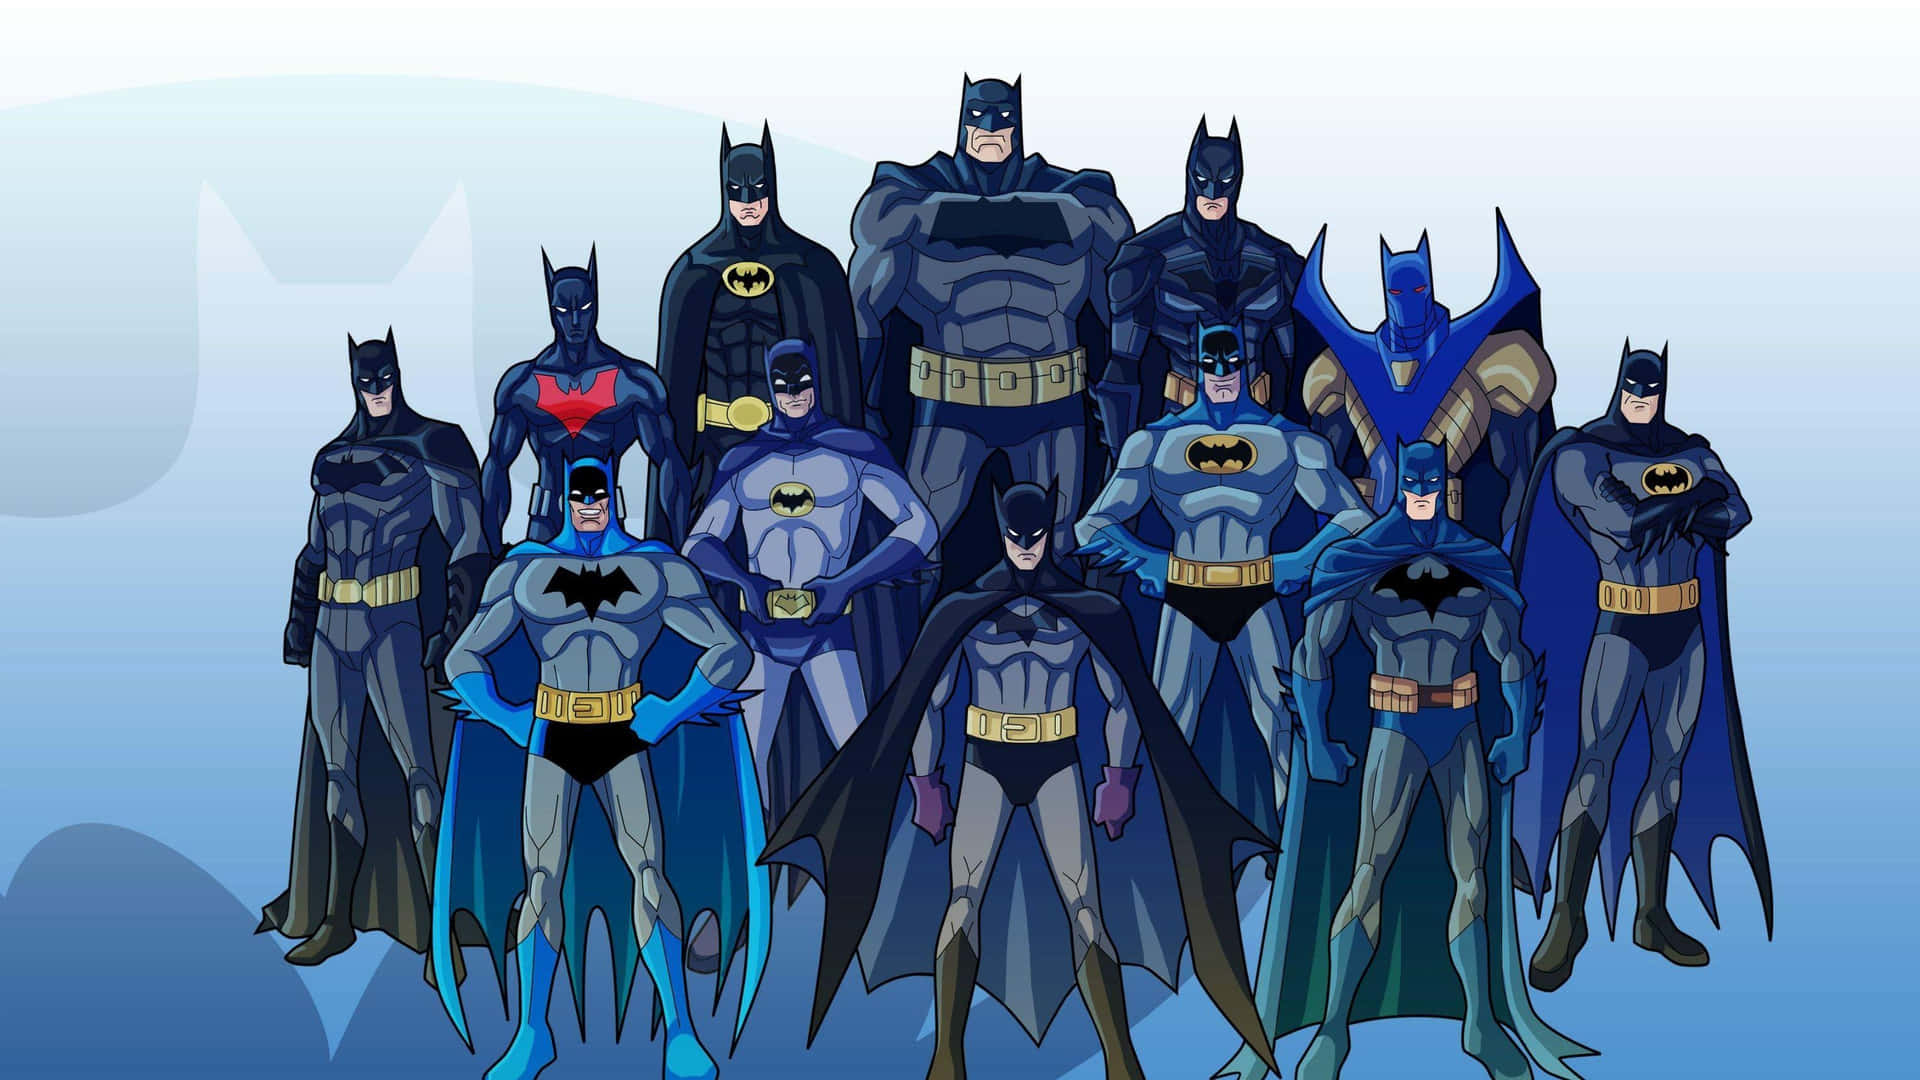 Bat-family: United and Fearless Wallpaper